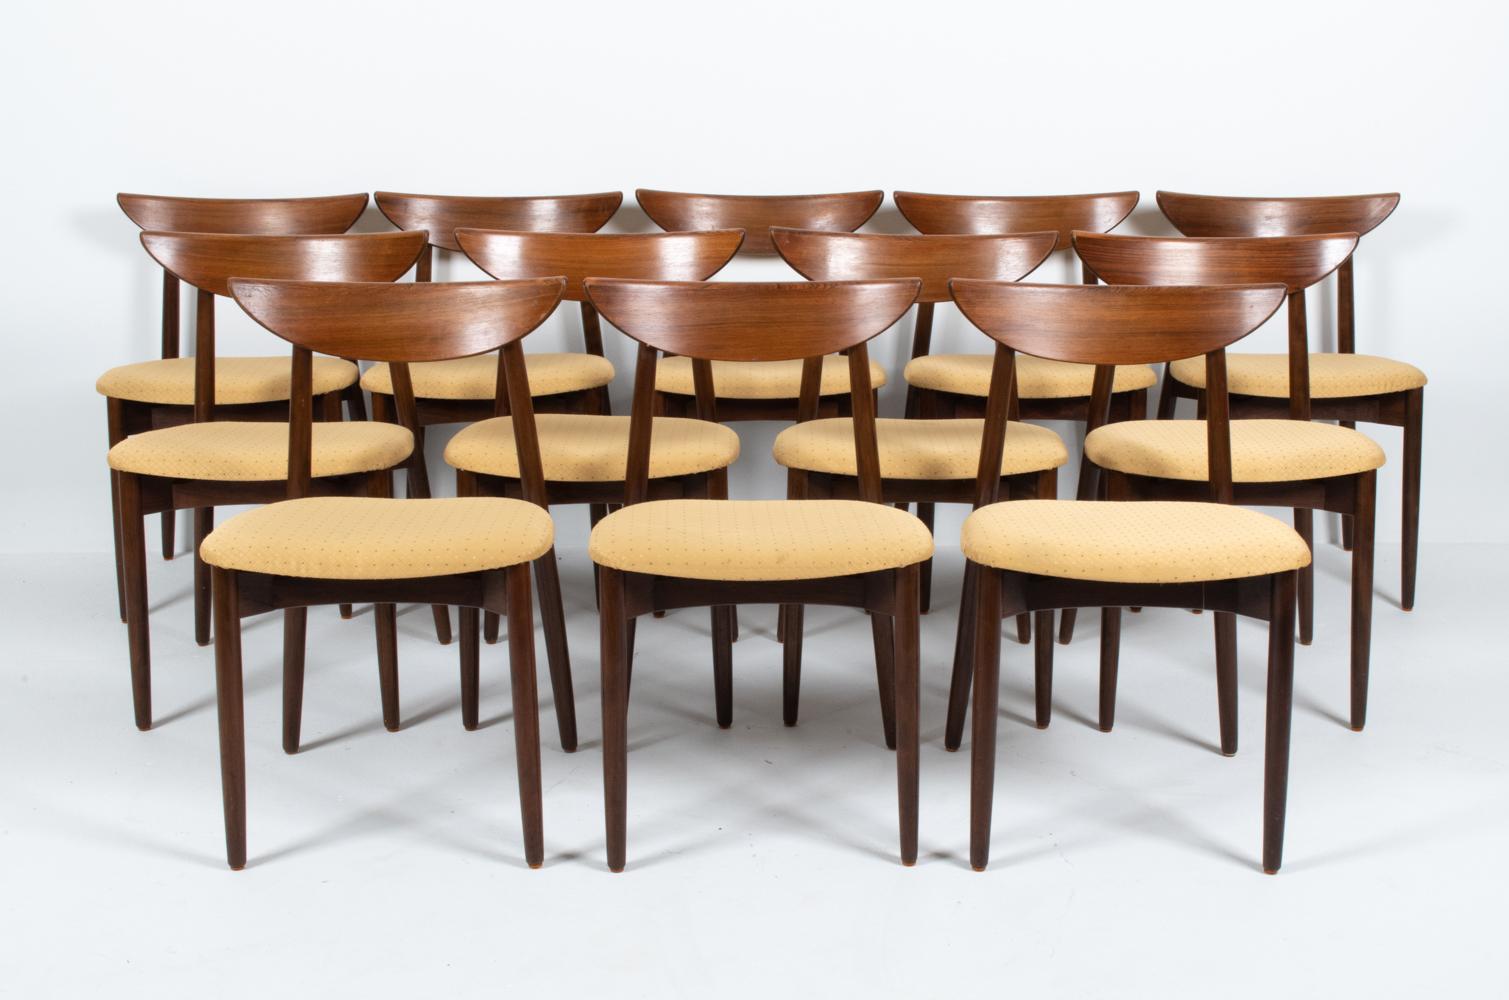 Scandinavian Modern (12) Harry Ostergaard Danish Mid-Century Rosewood Dining Chairs For Sale